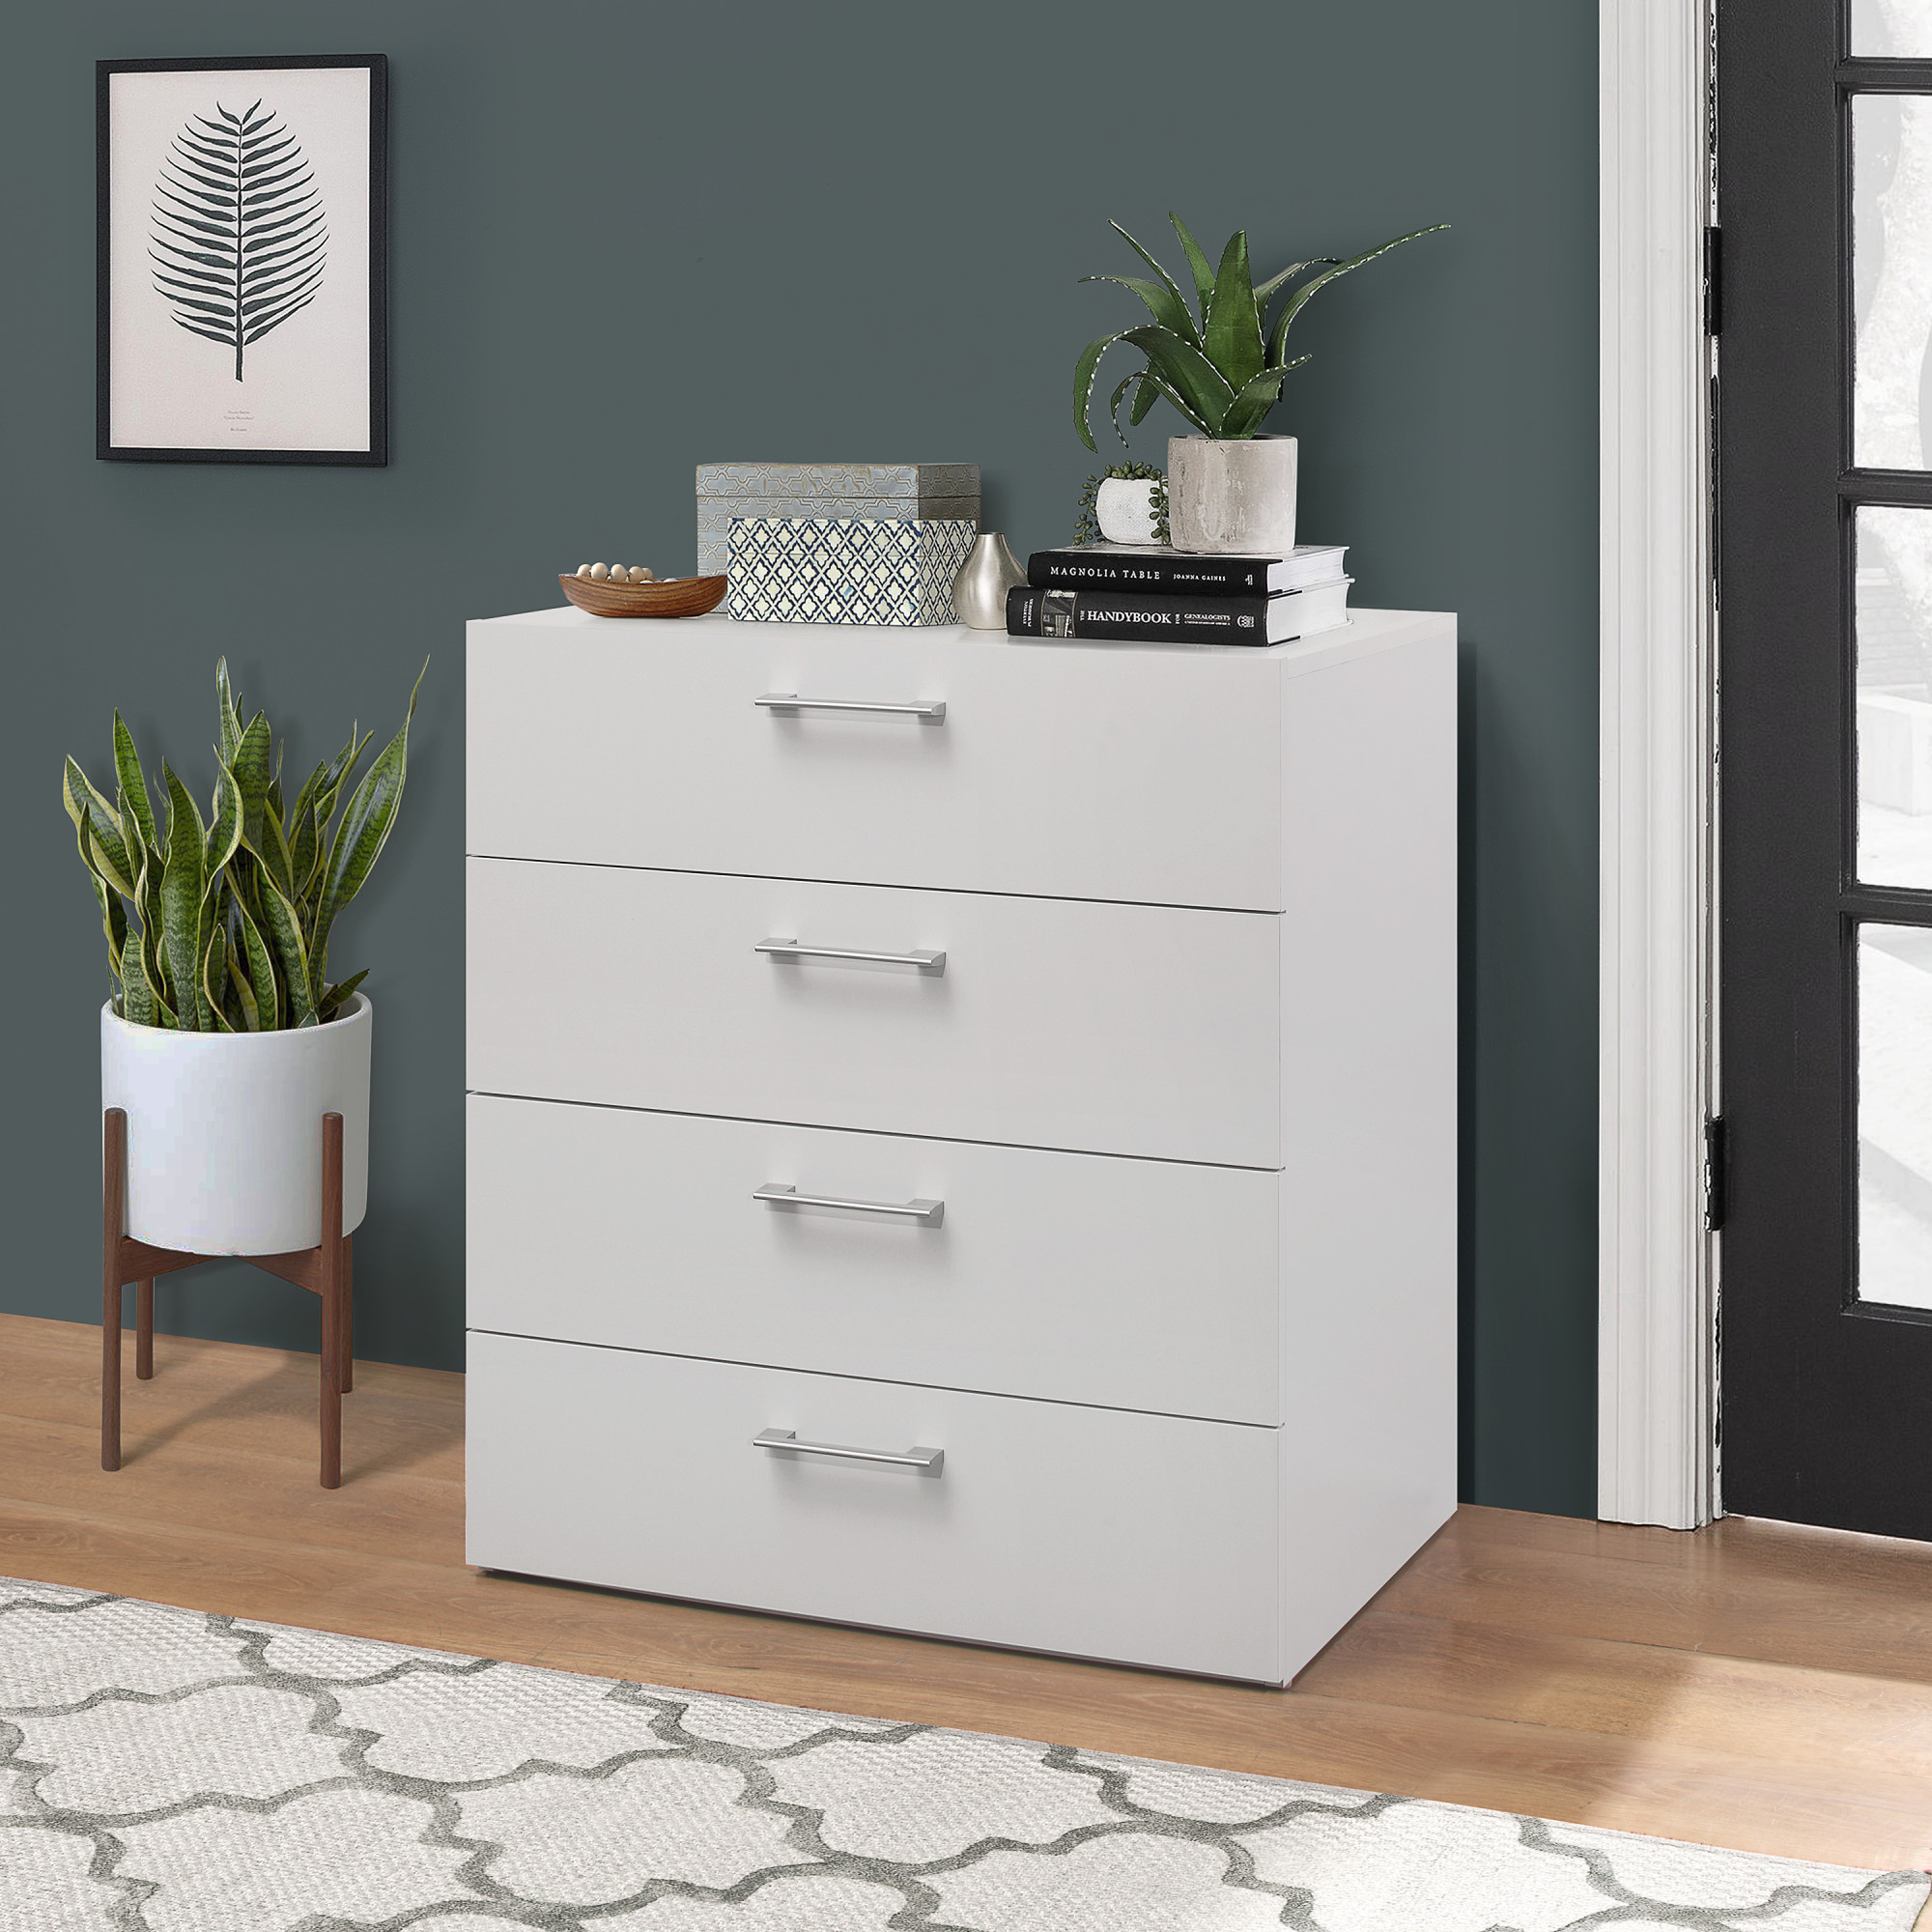 Lundy 4-Drawer Dresser, White, by Hillsdale Living Essentials - image 1 of 17